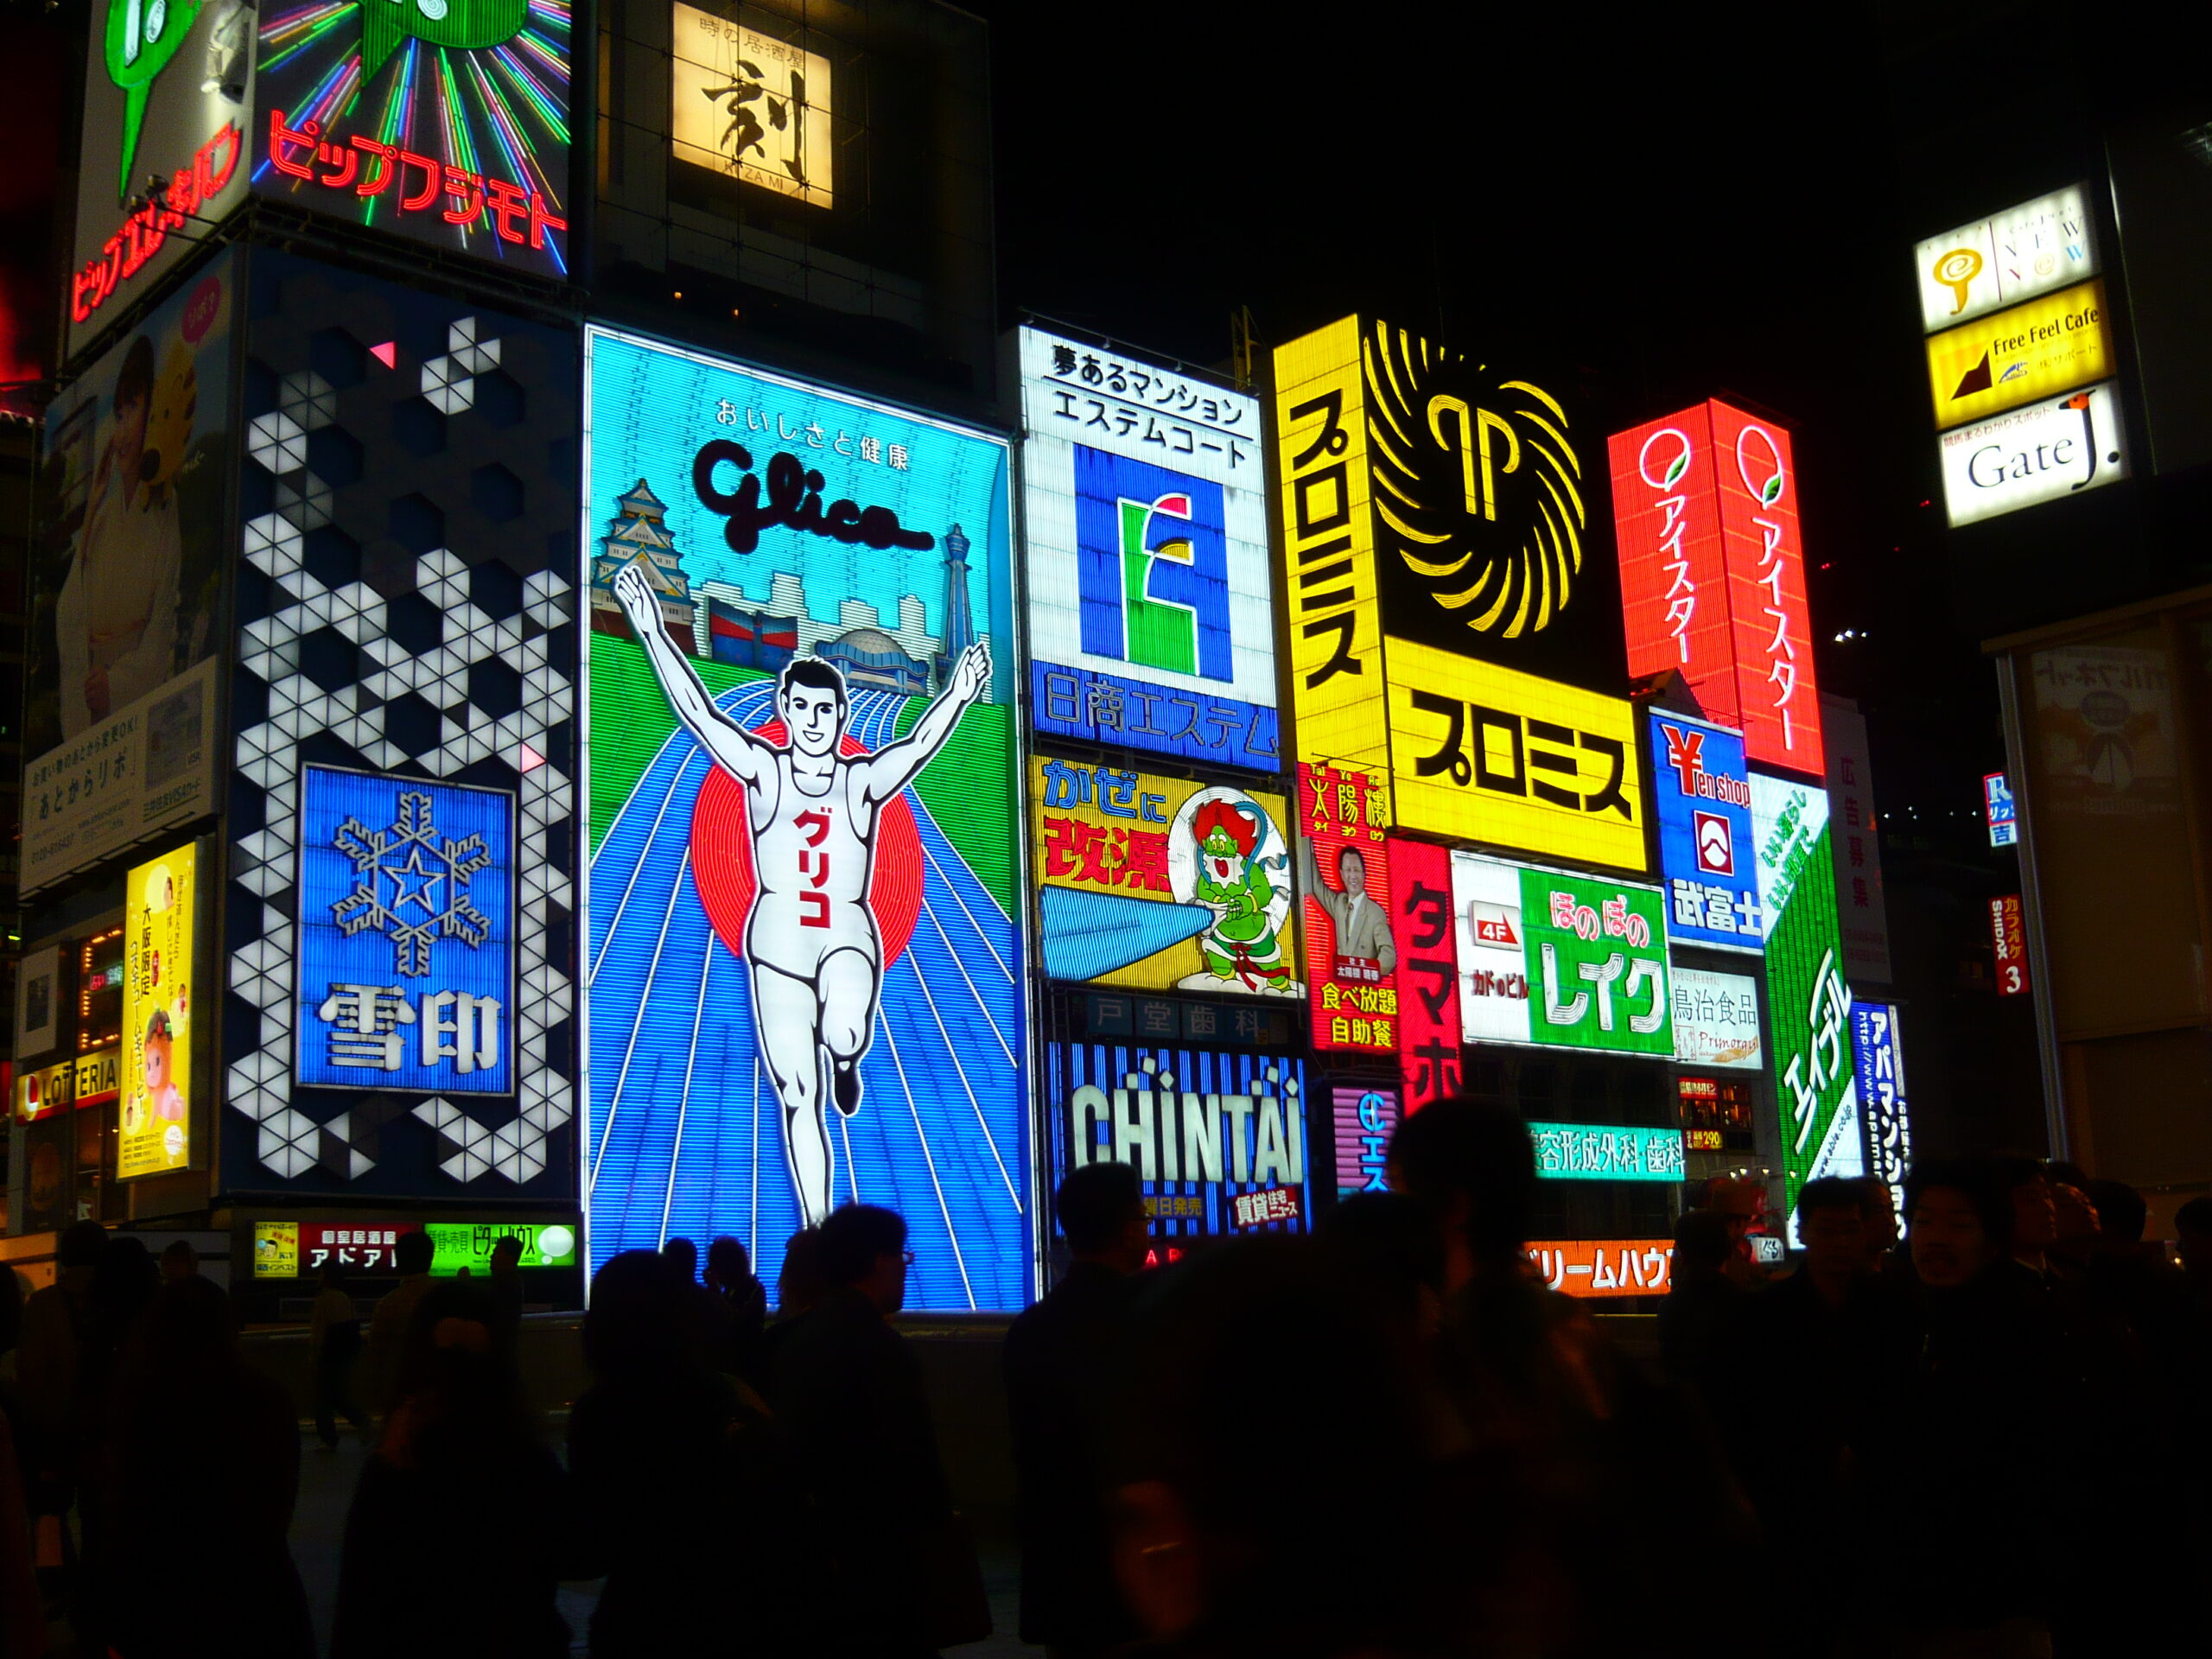 You may not have the same needs as Osaka's Glico running man signage... but it's still cool nonetheless.